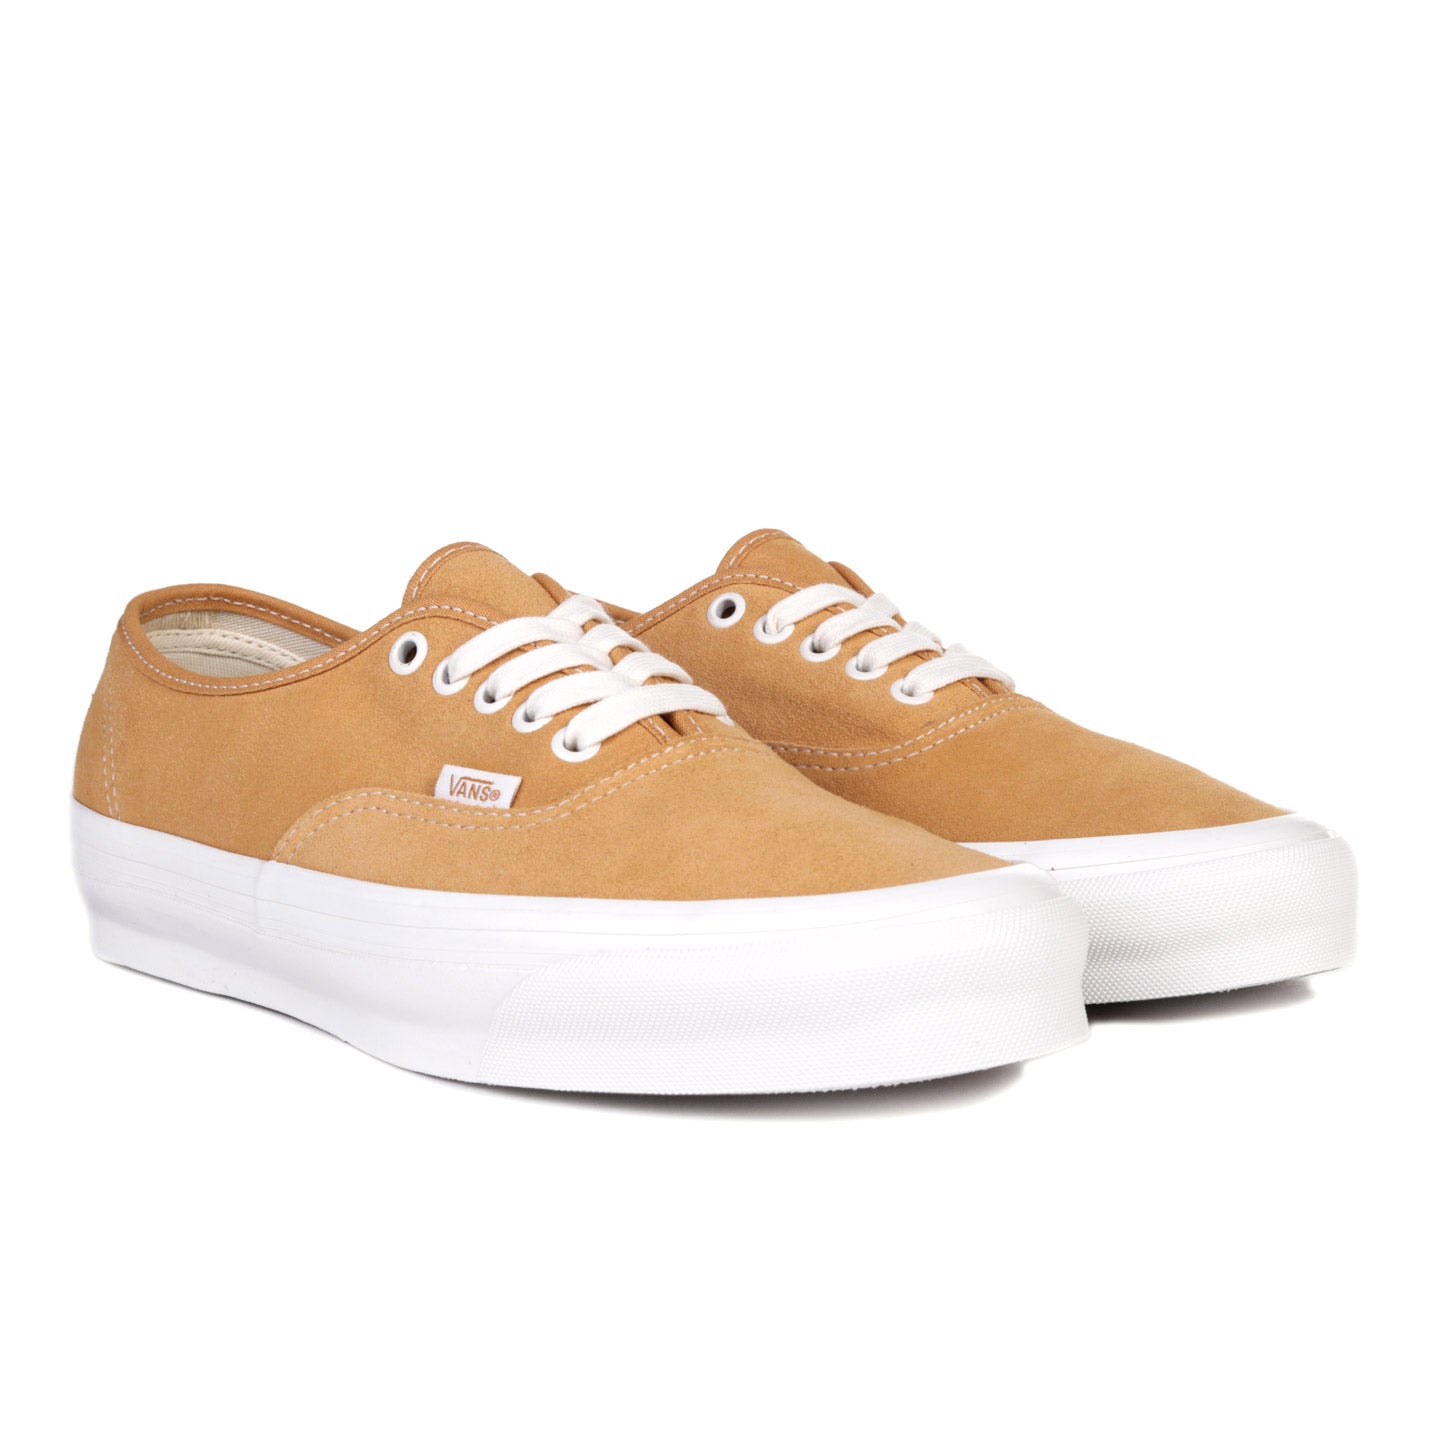 VAULT BY VANS OG AUTHENTIC LX SUEDE YELLOW